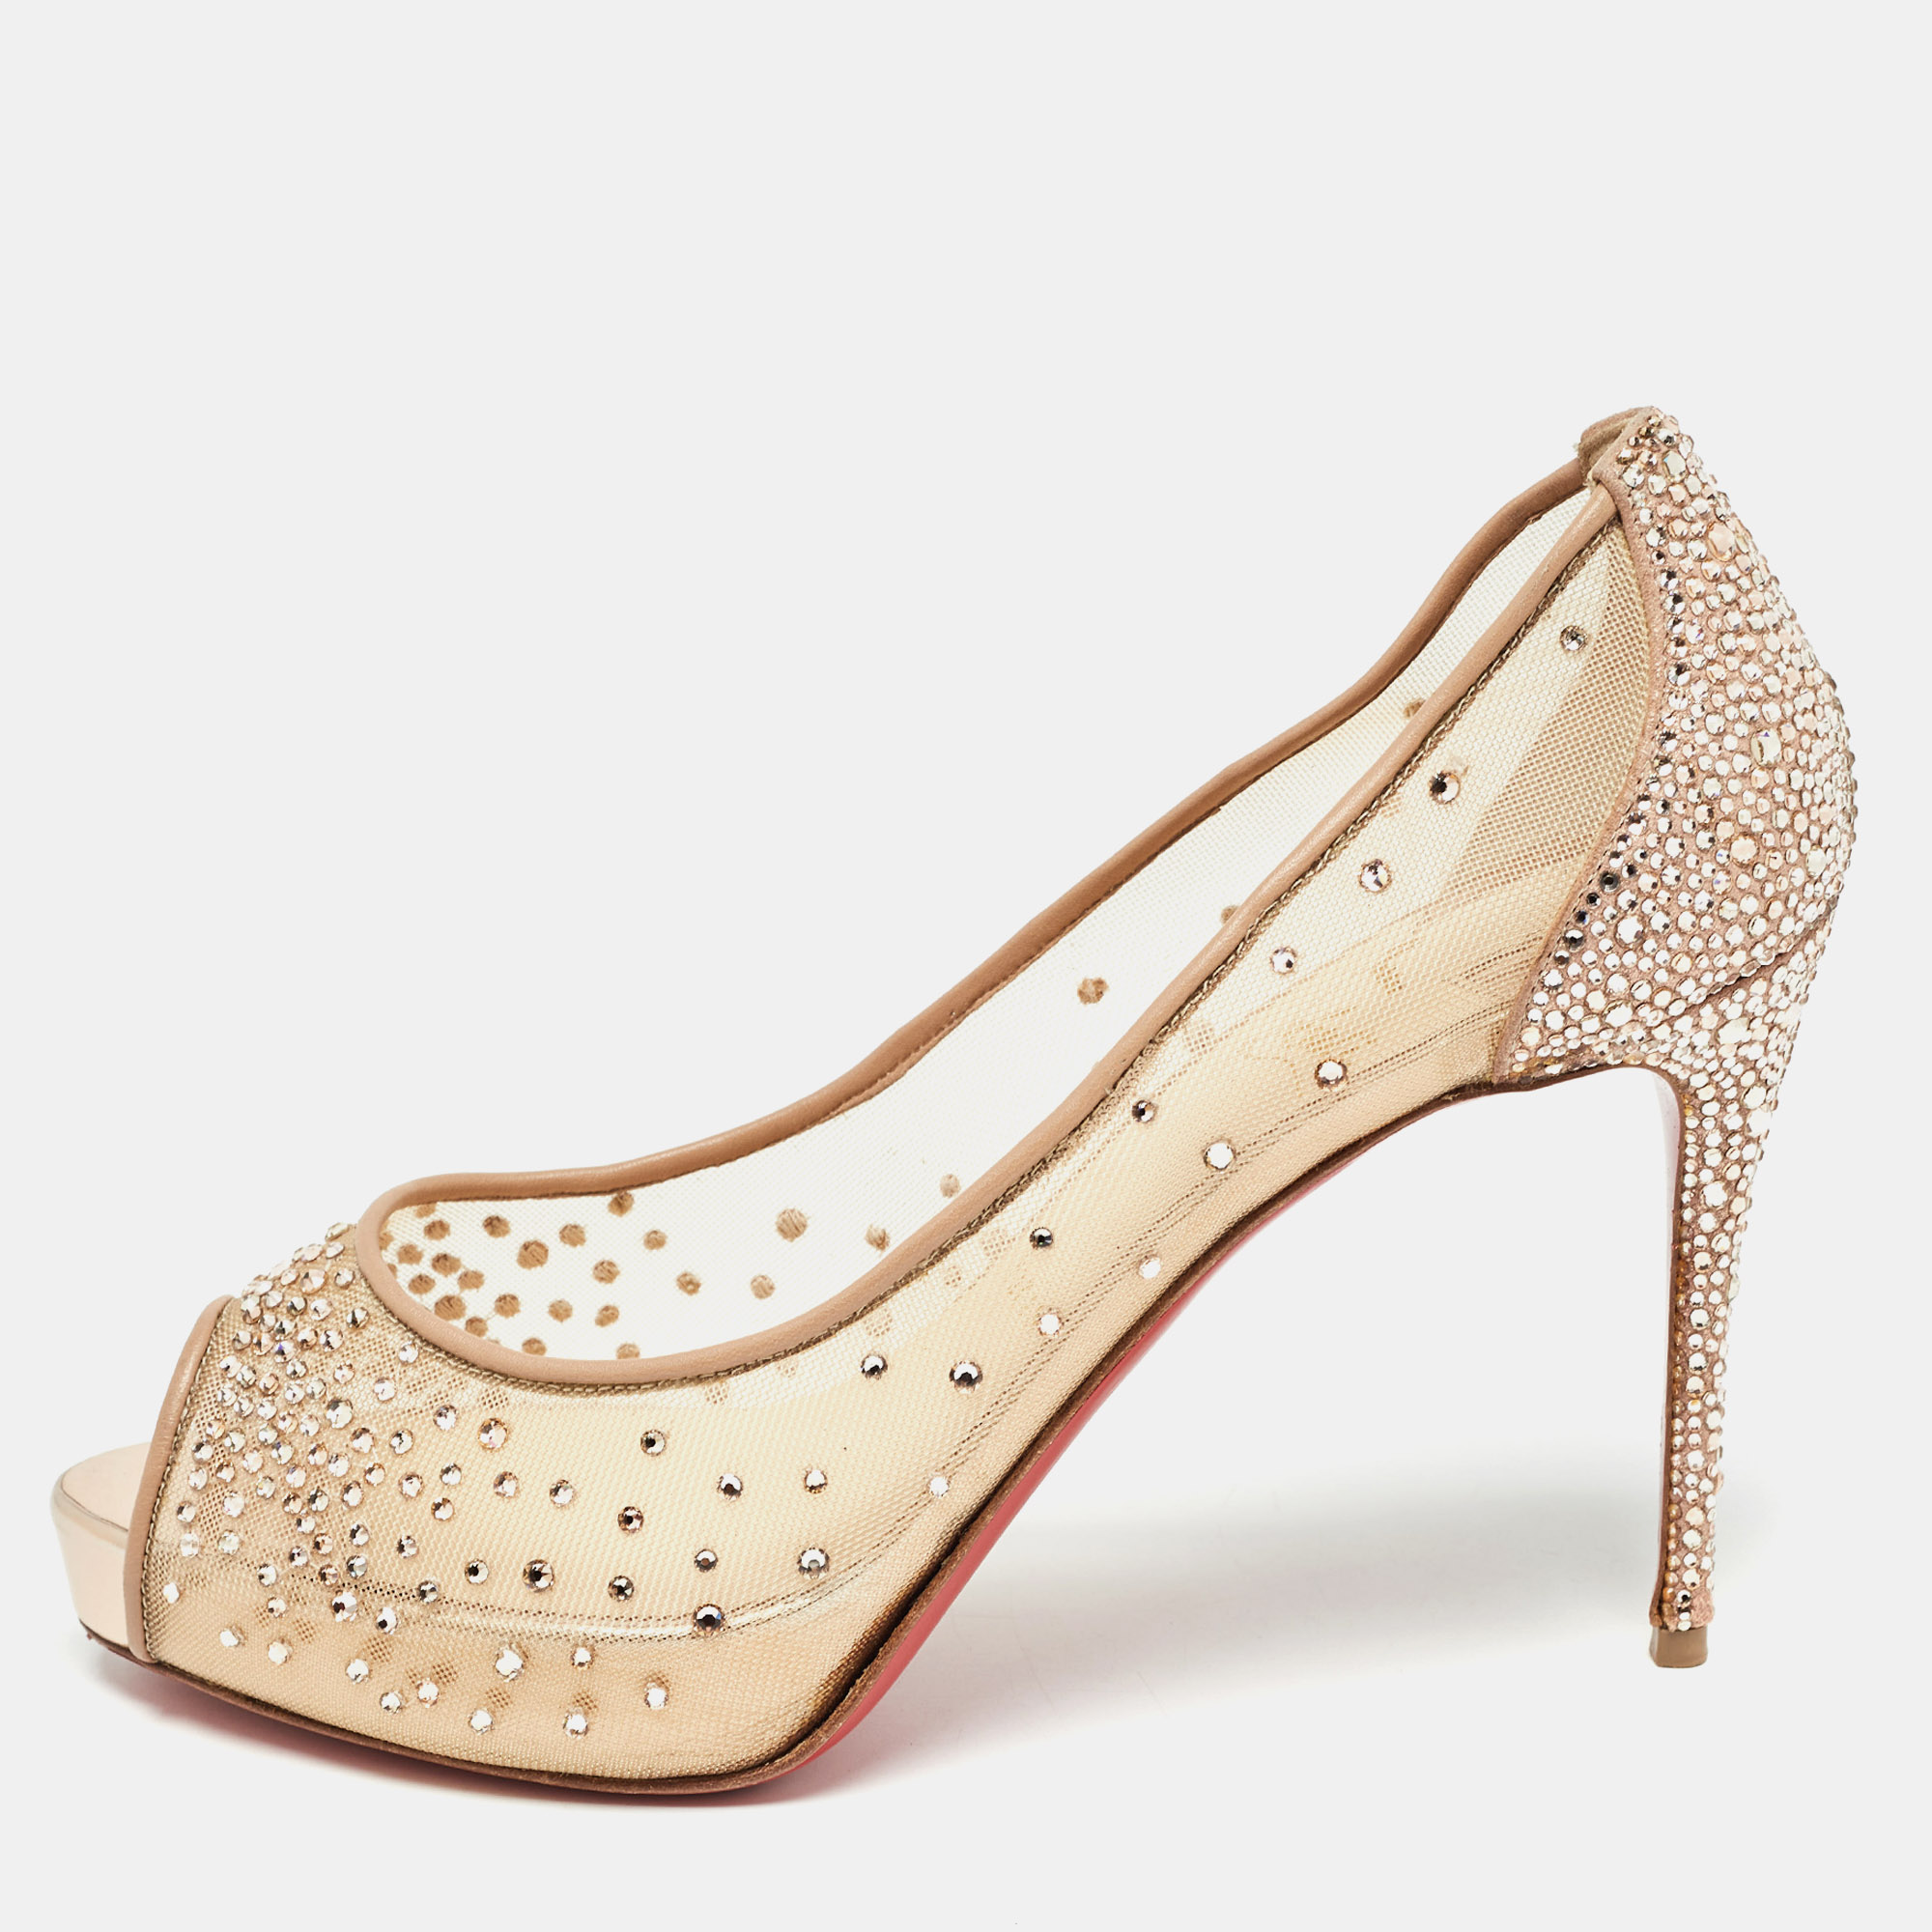 Christian louboutin beige crystal embellished mesh and leather very strass peep toe pumps size 37